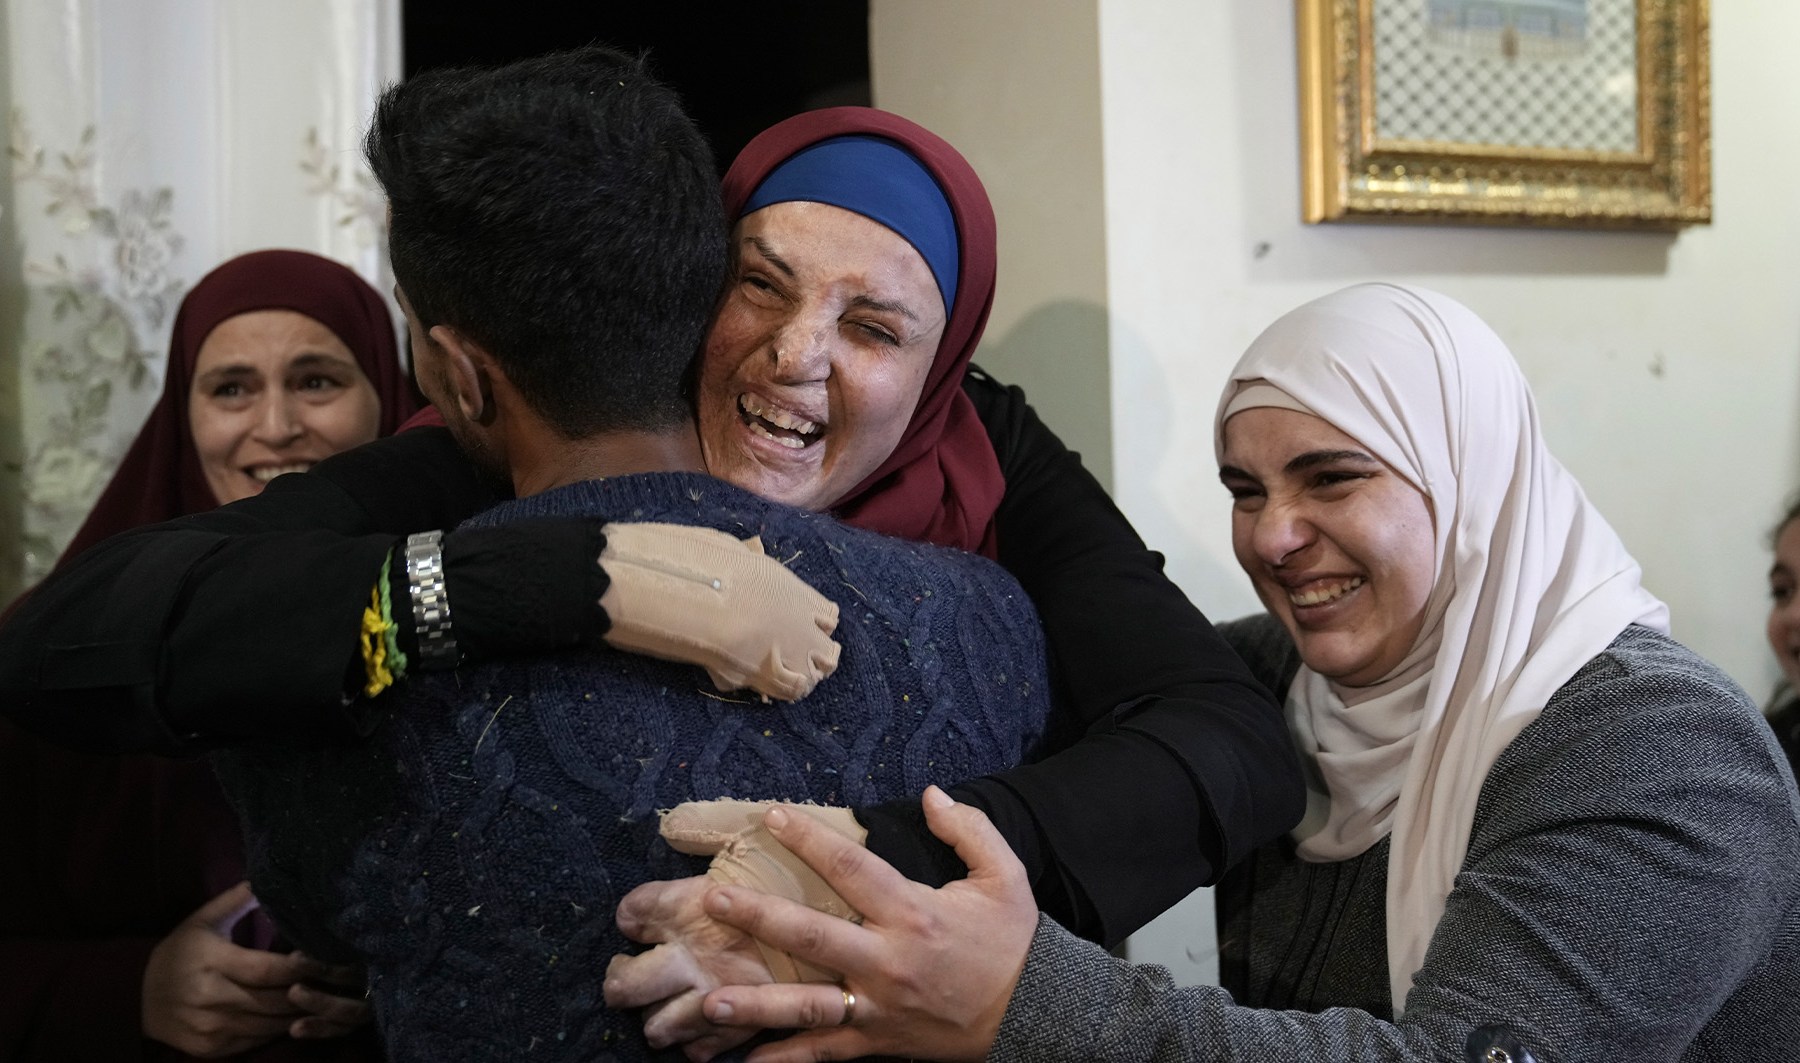 Israa Jaabis returns home after release from Israeli prison | Occupied East Jerusalem